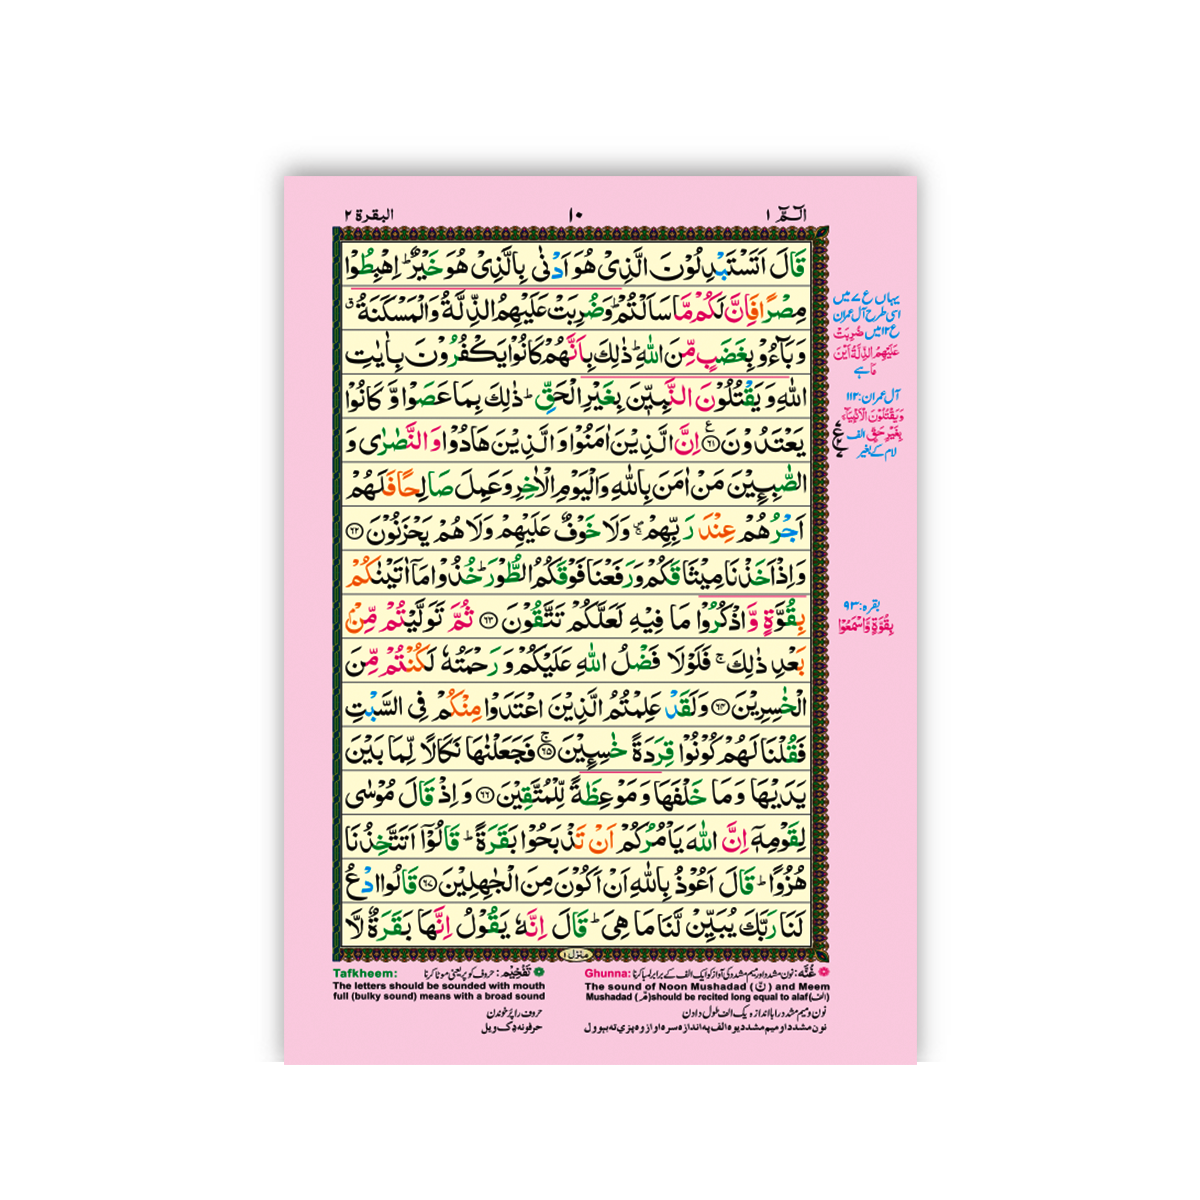 [877/4M] Al-Quran-Ul-Kareem In 16 Lines With Tajweed Rules (Without Translation) - Gift Edition